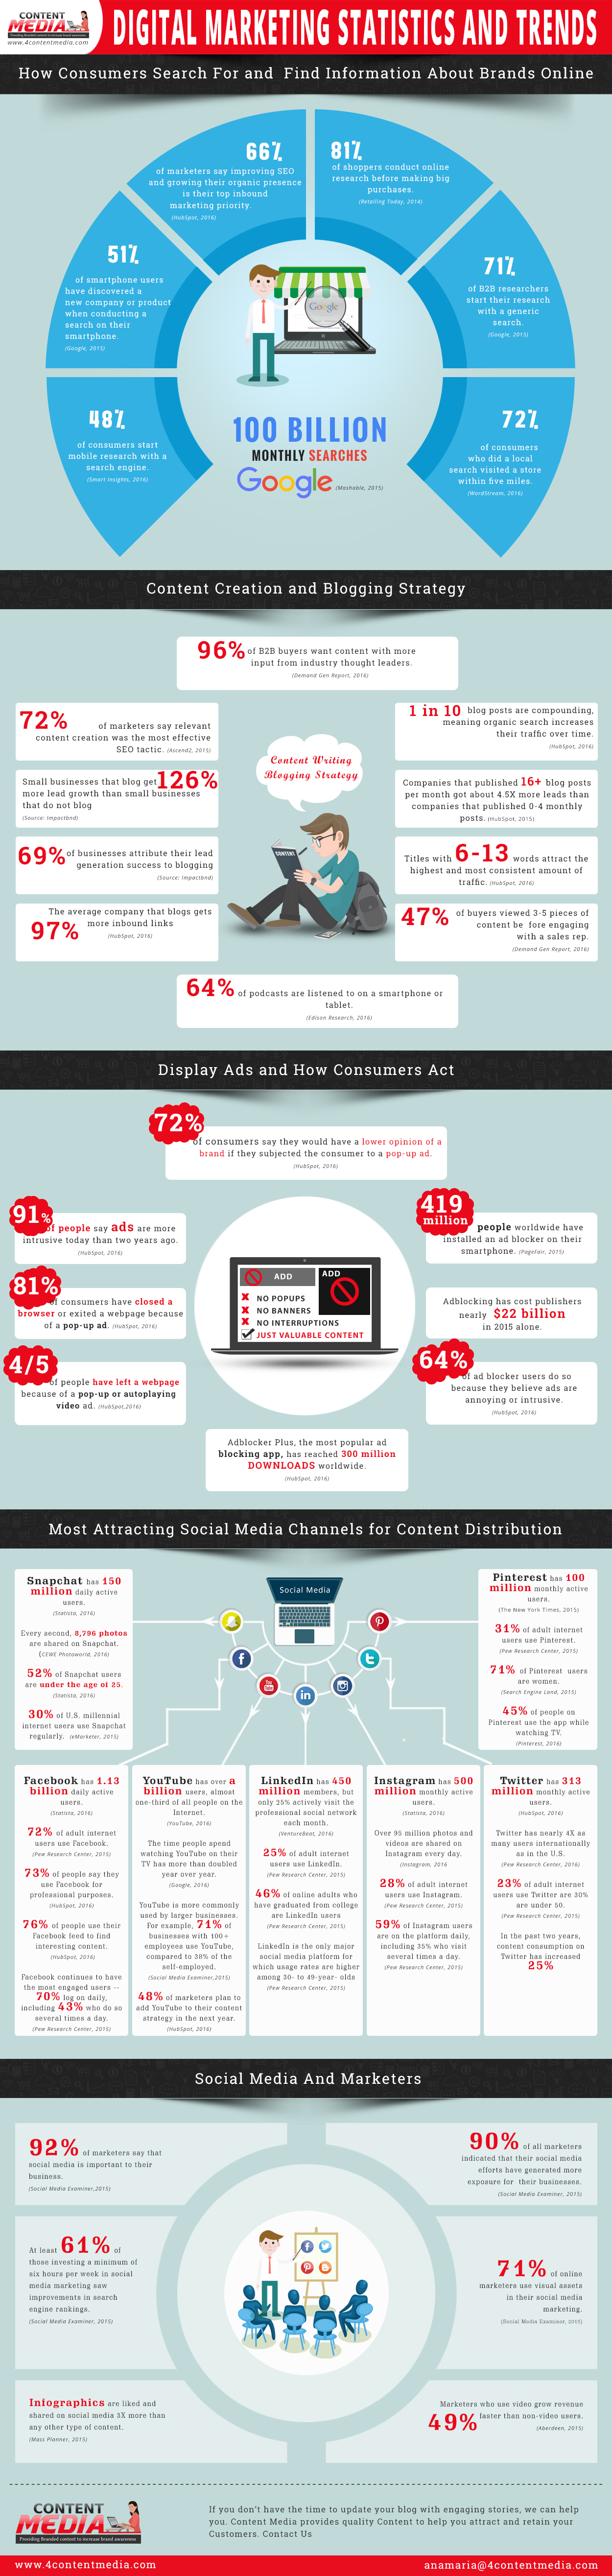 Content Marketing - Infographic